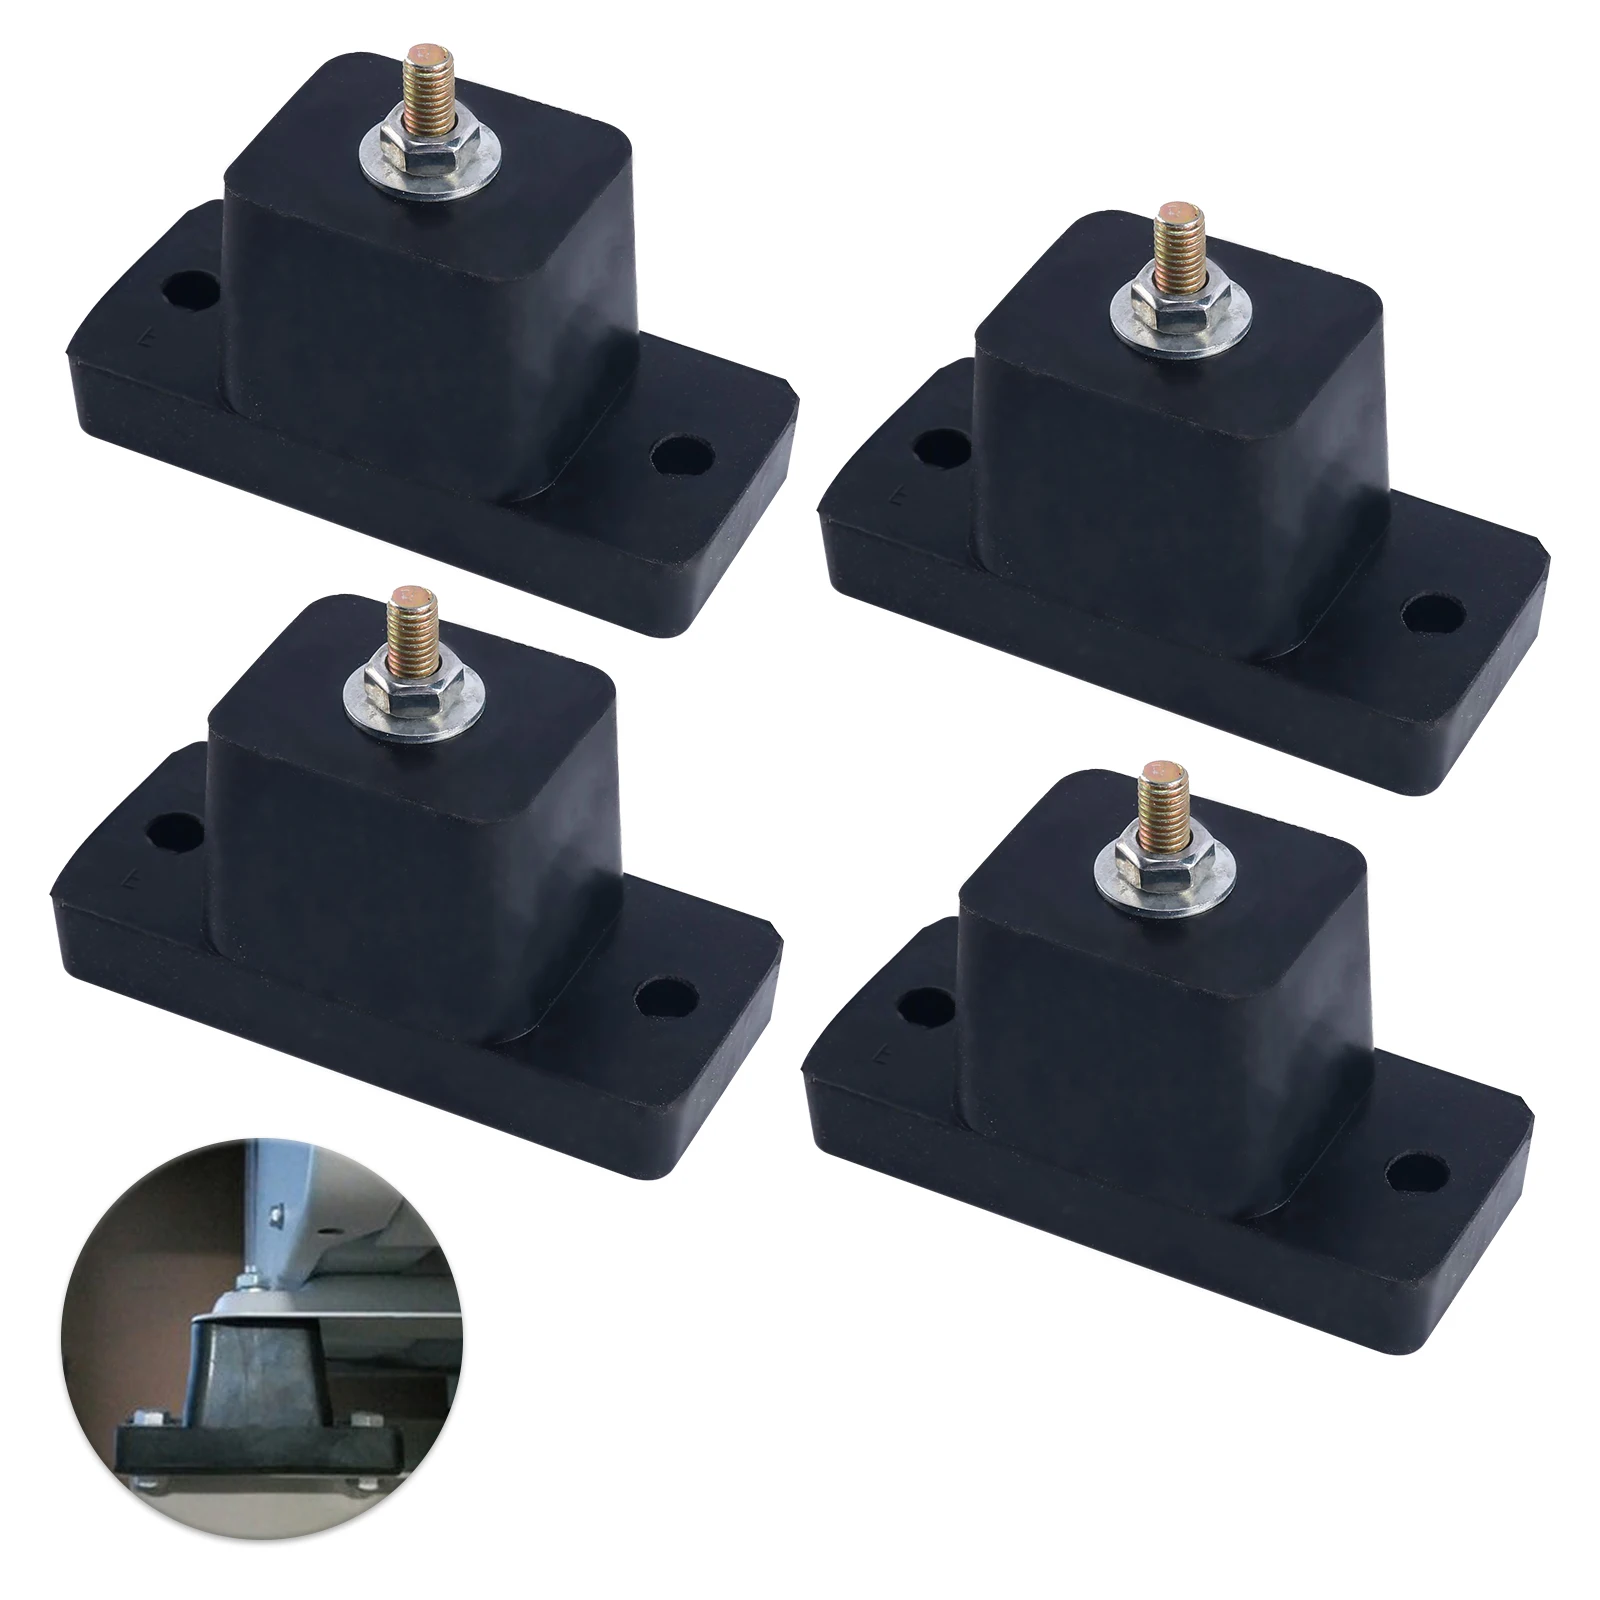 New arrival 4 Pack Cushion Air Conditioner Rubber Vibration Mounting Bracket Shock Absorbing Anti-Vibration Isolator Pads